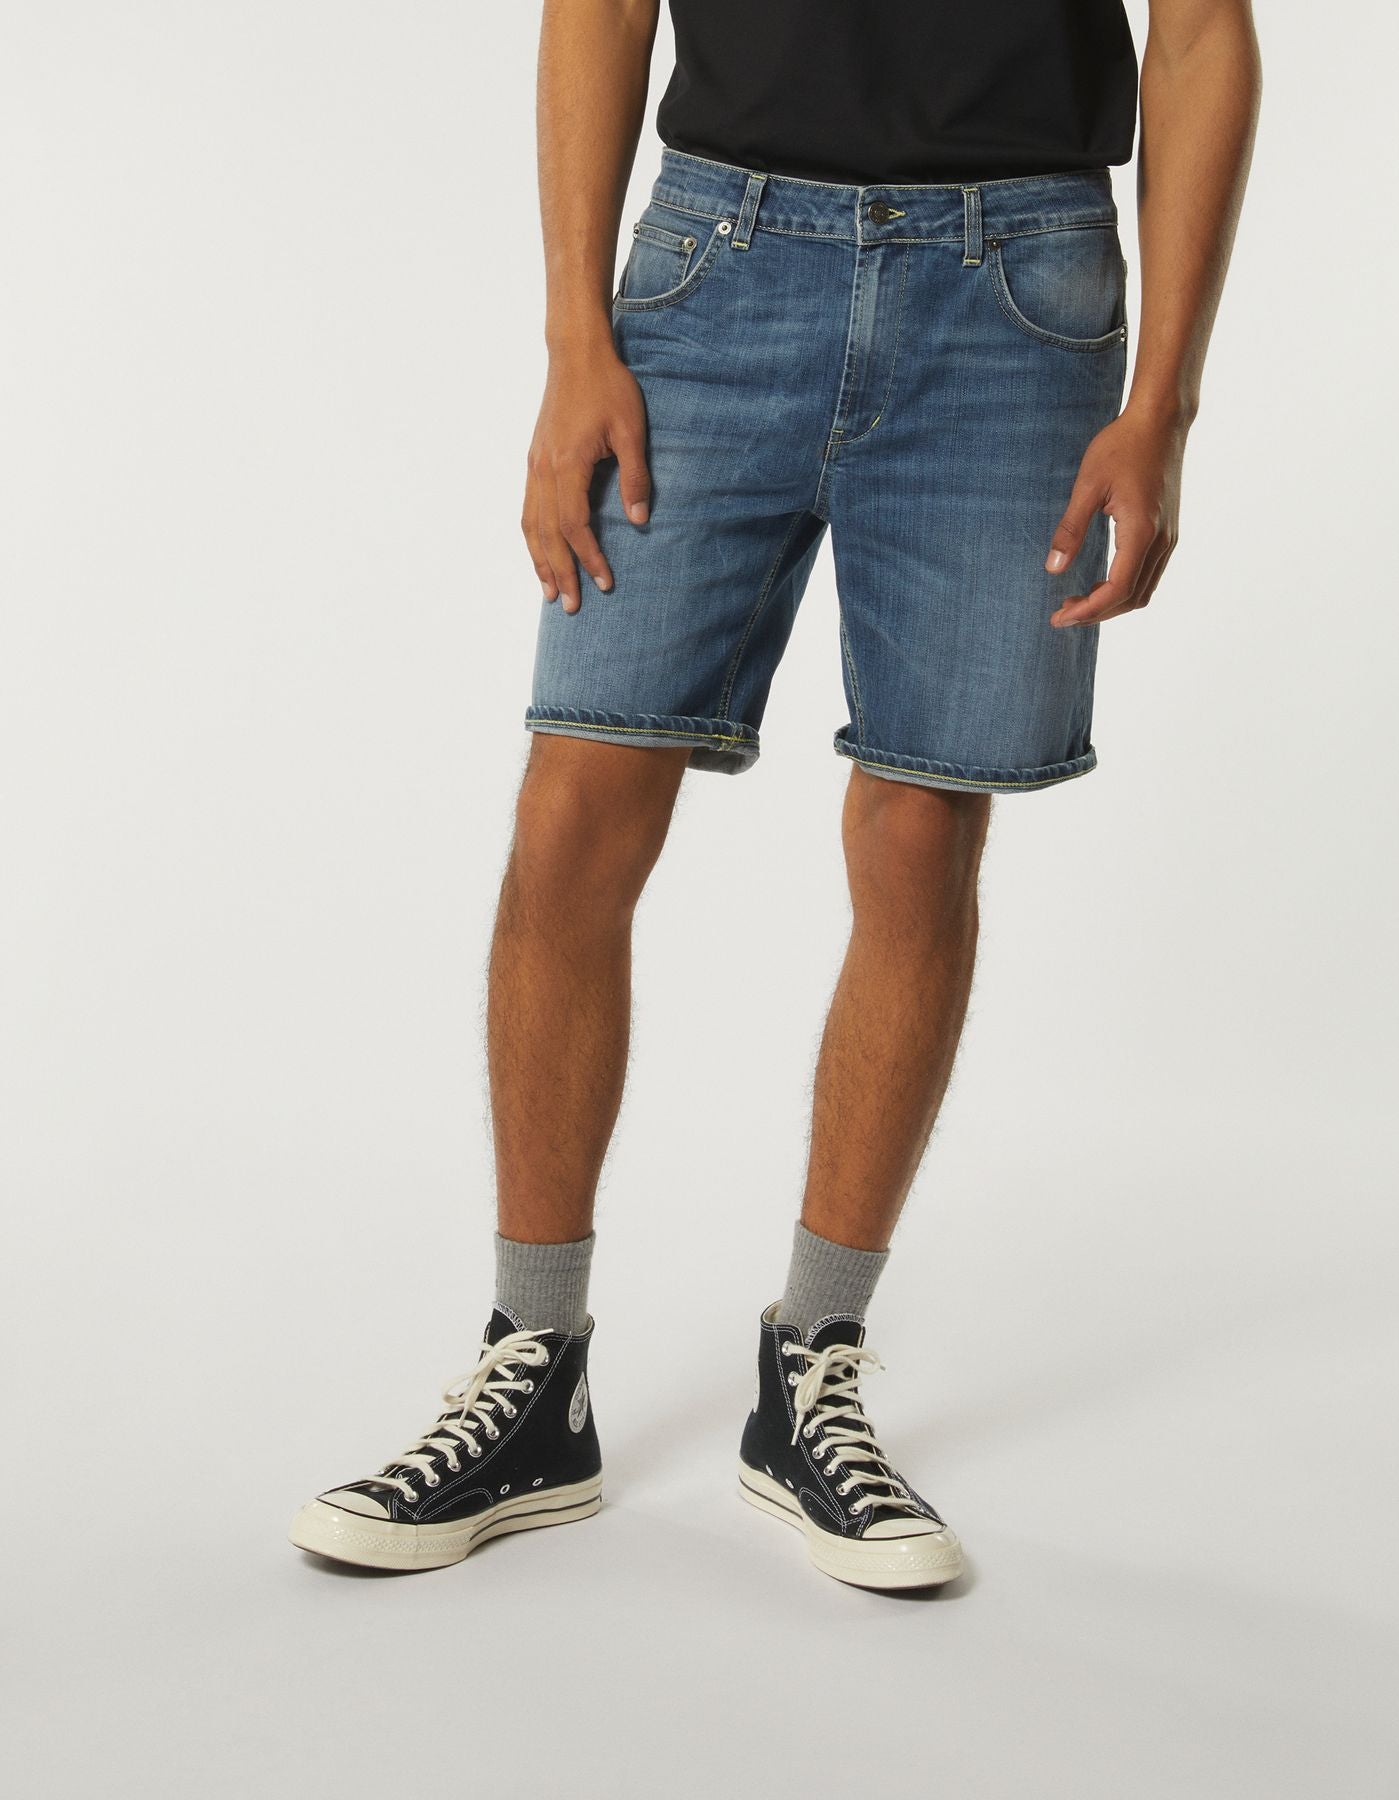 UP454 DS0050 - JEANS - DONDUP